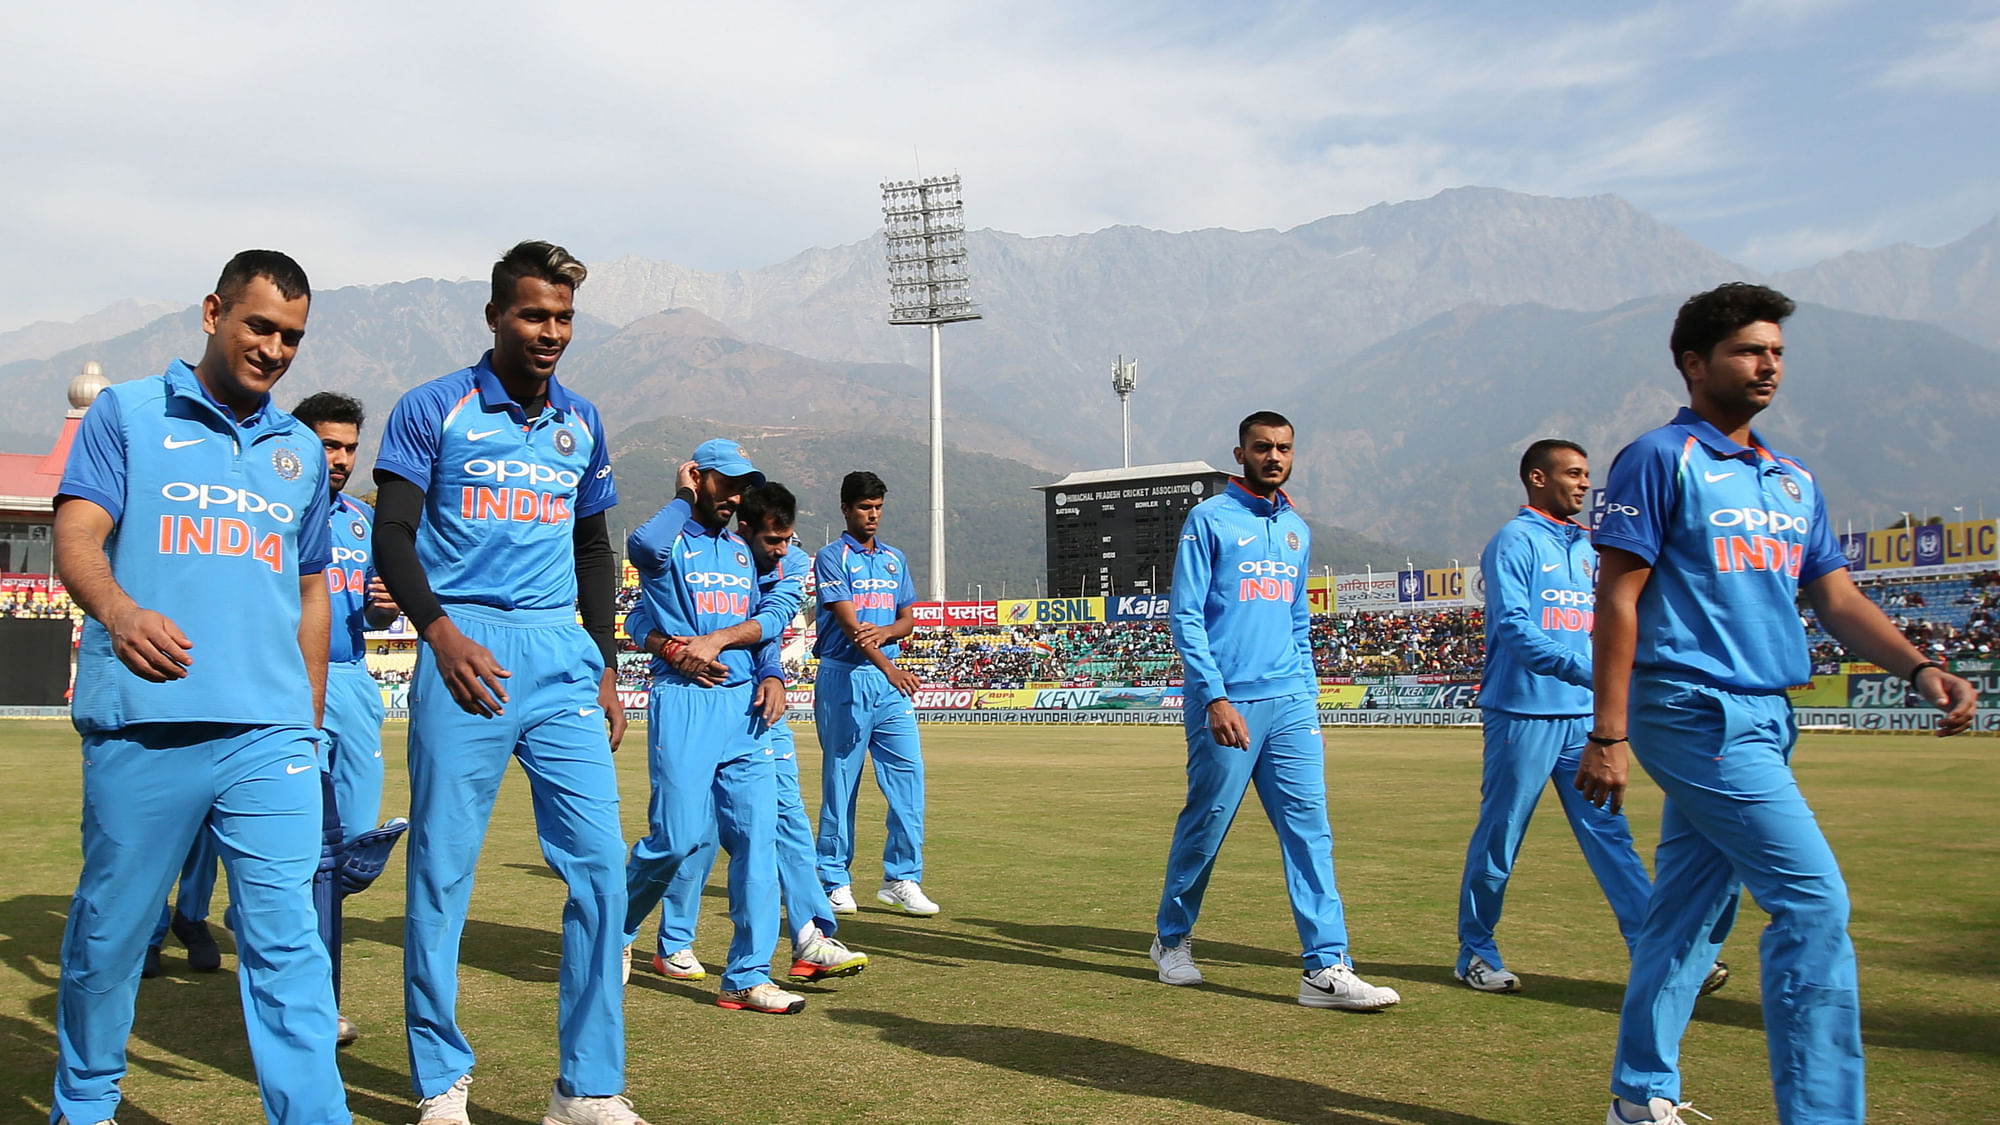 India lost by 7 wickets in the first ODI at Dharamshala.